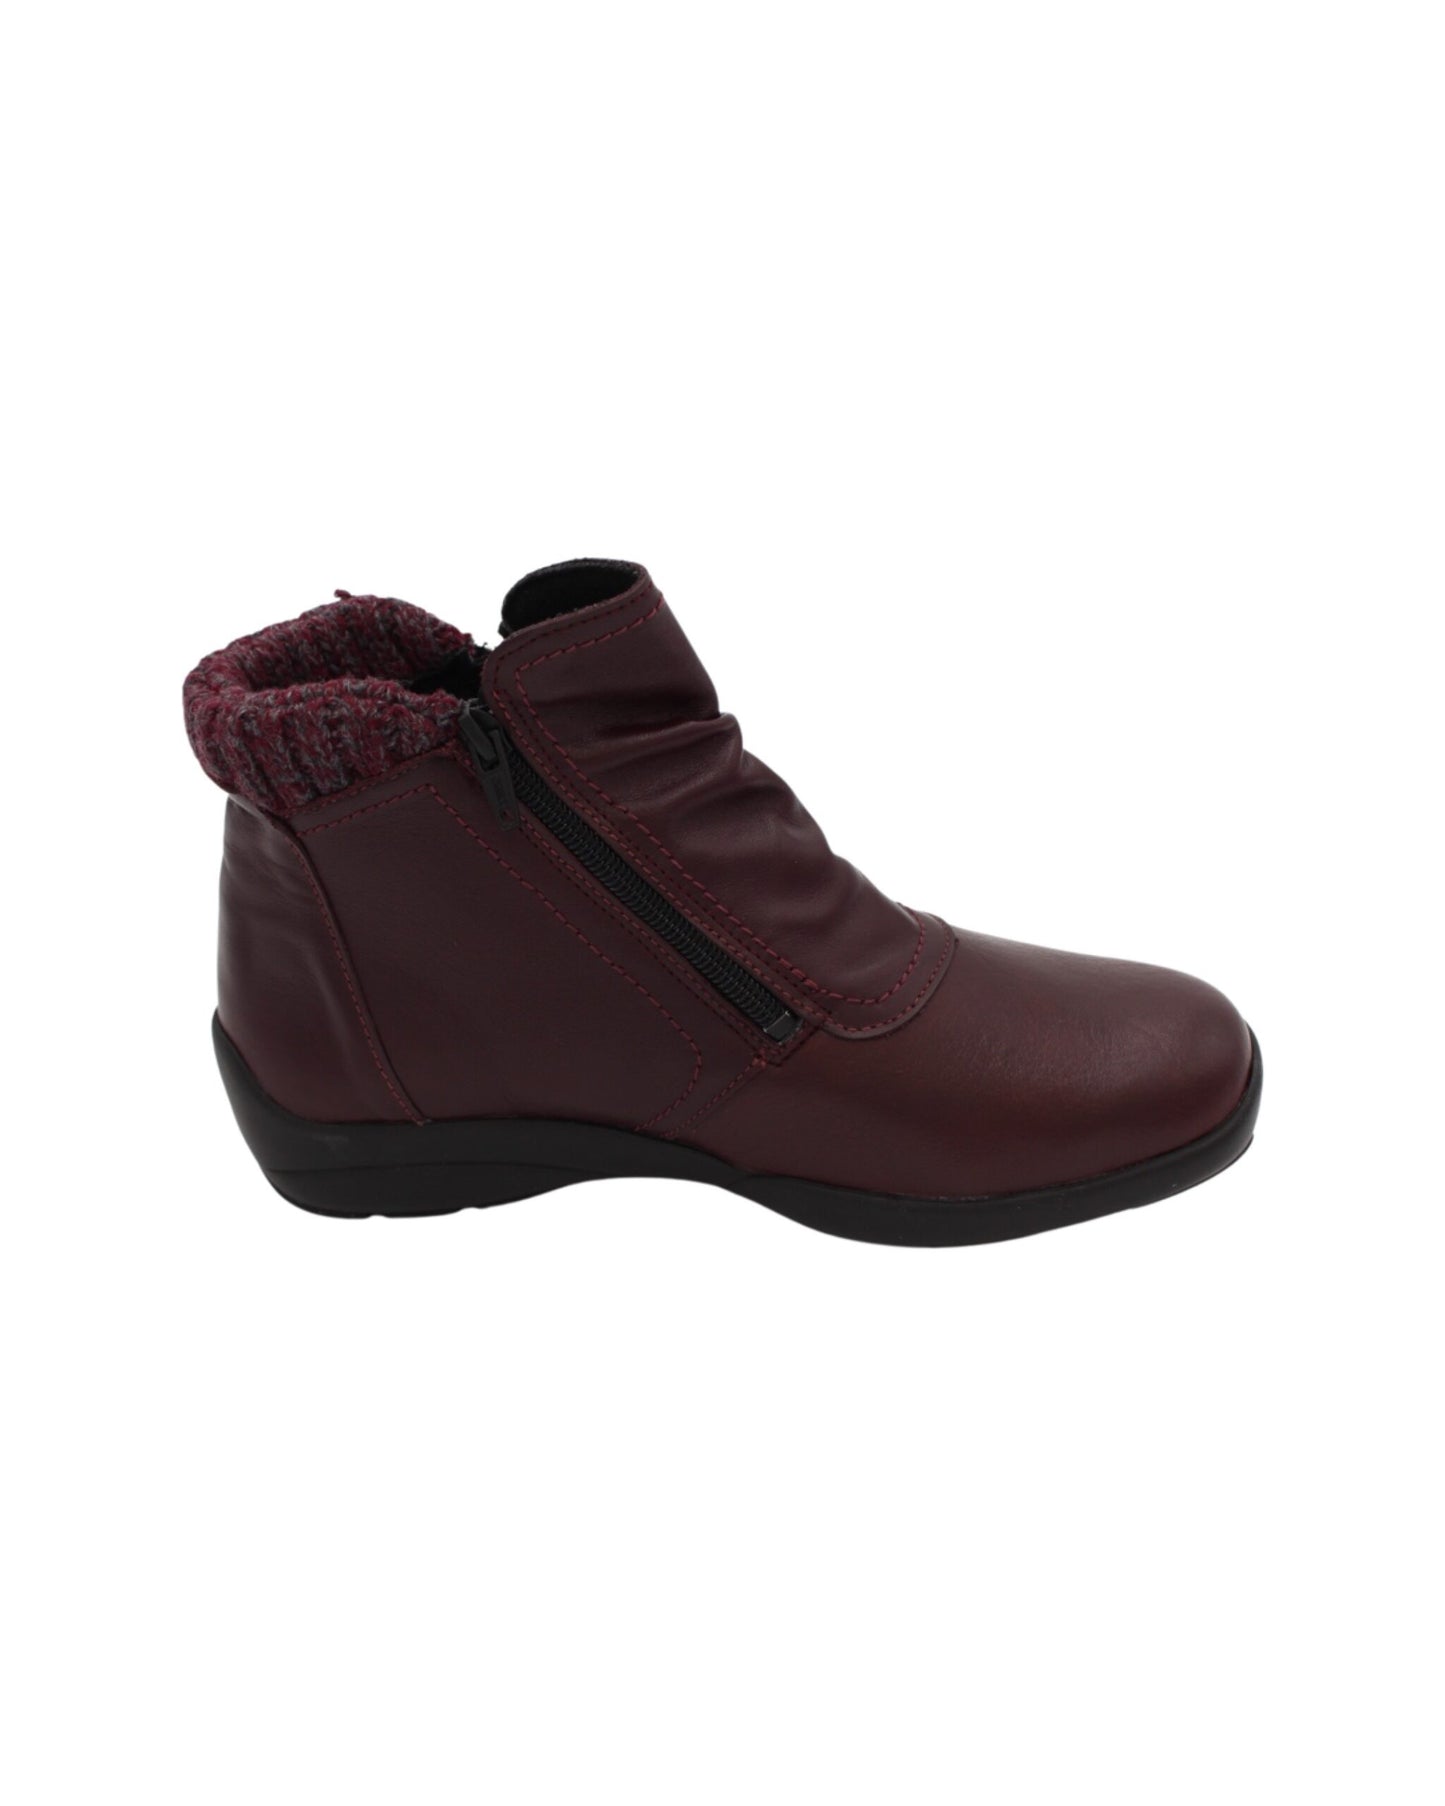 DB Shoes Ankle Boots  Burgundy